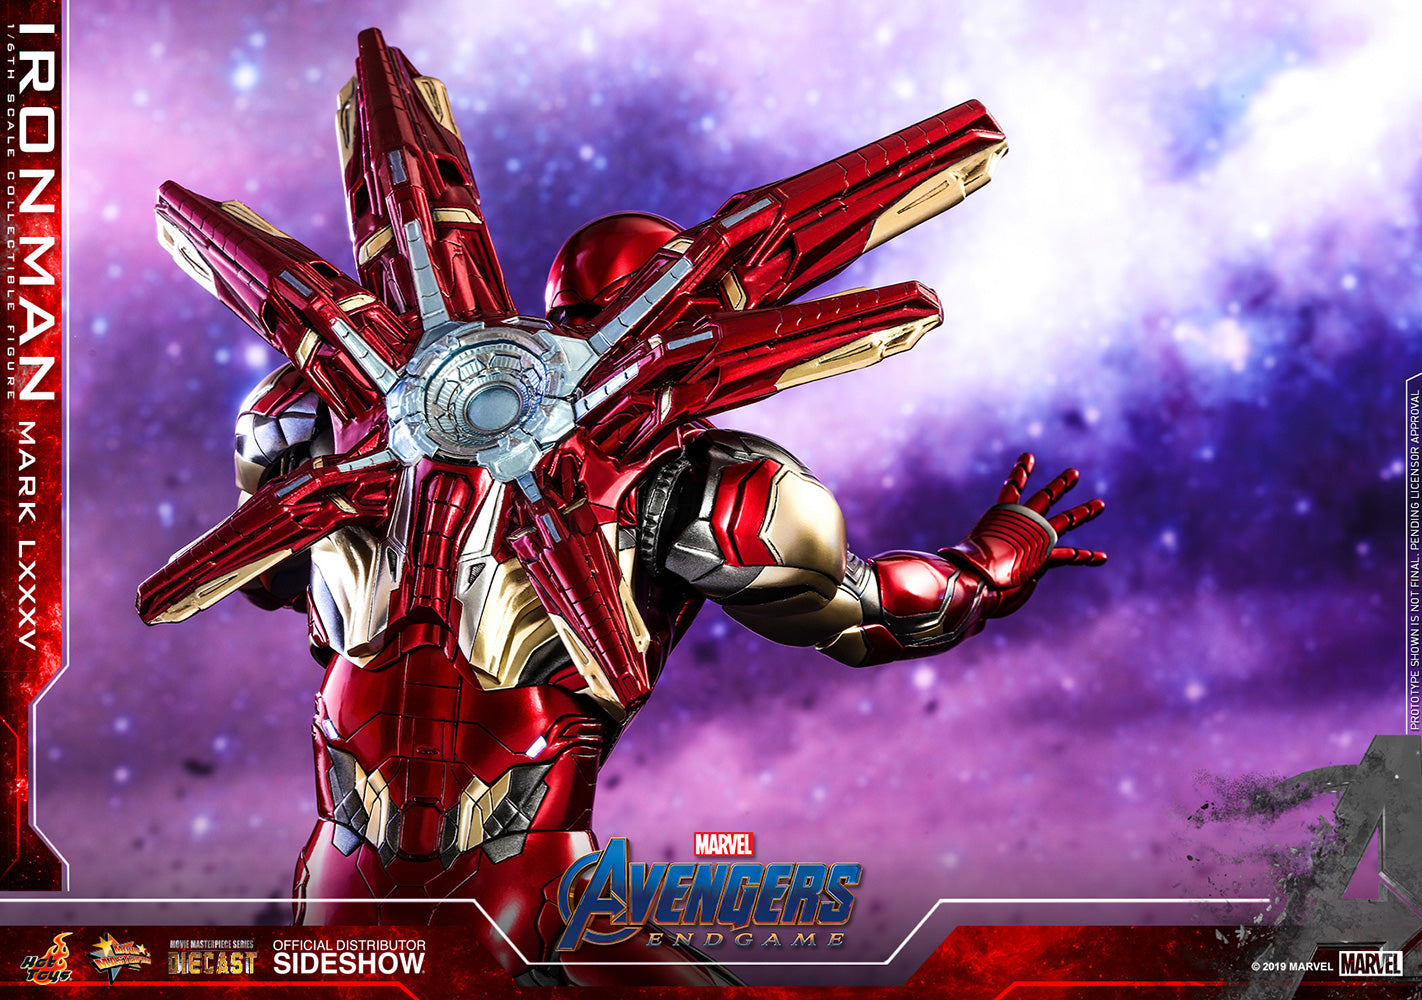 Iron Man Mark LXXXV - Avengers: End Game - Sixth Scale Figure by Hot Toys